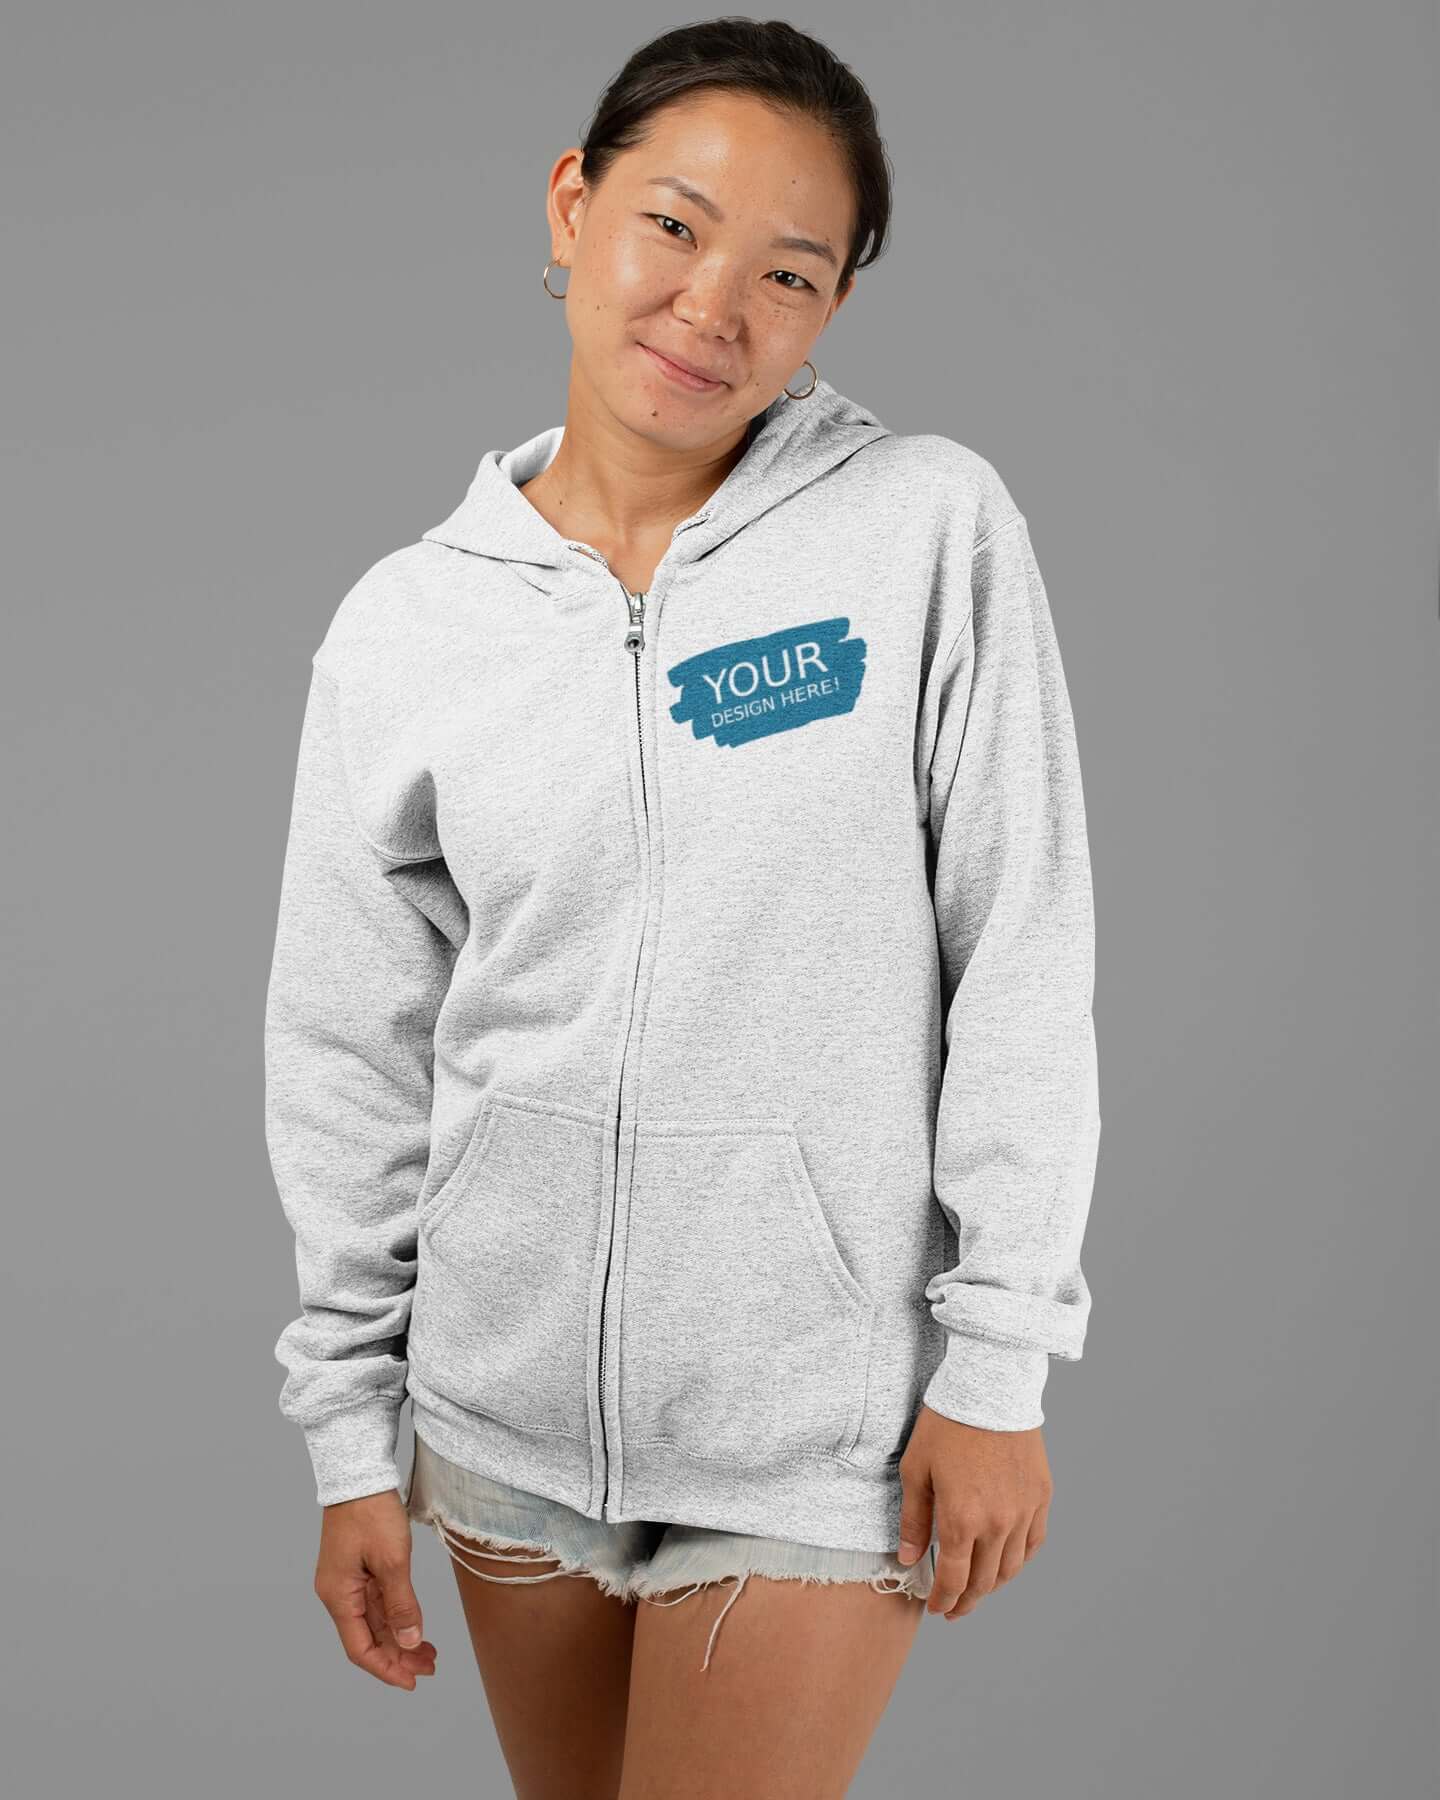 Customize unisex heavy blend zip-up hoodies online for your team, group or event. Printiful features free shipping, live help and thousands of designs.